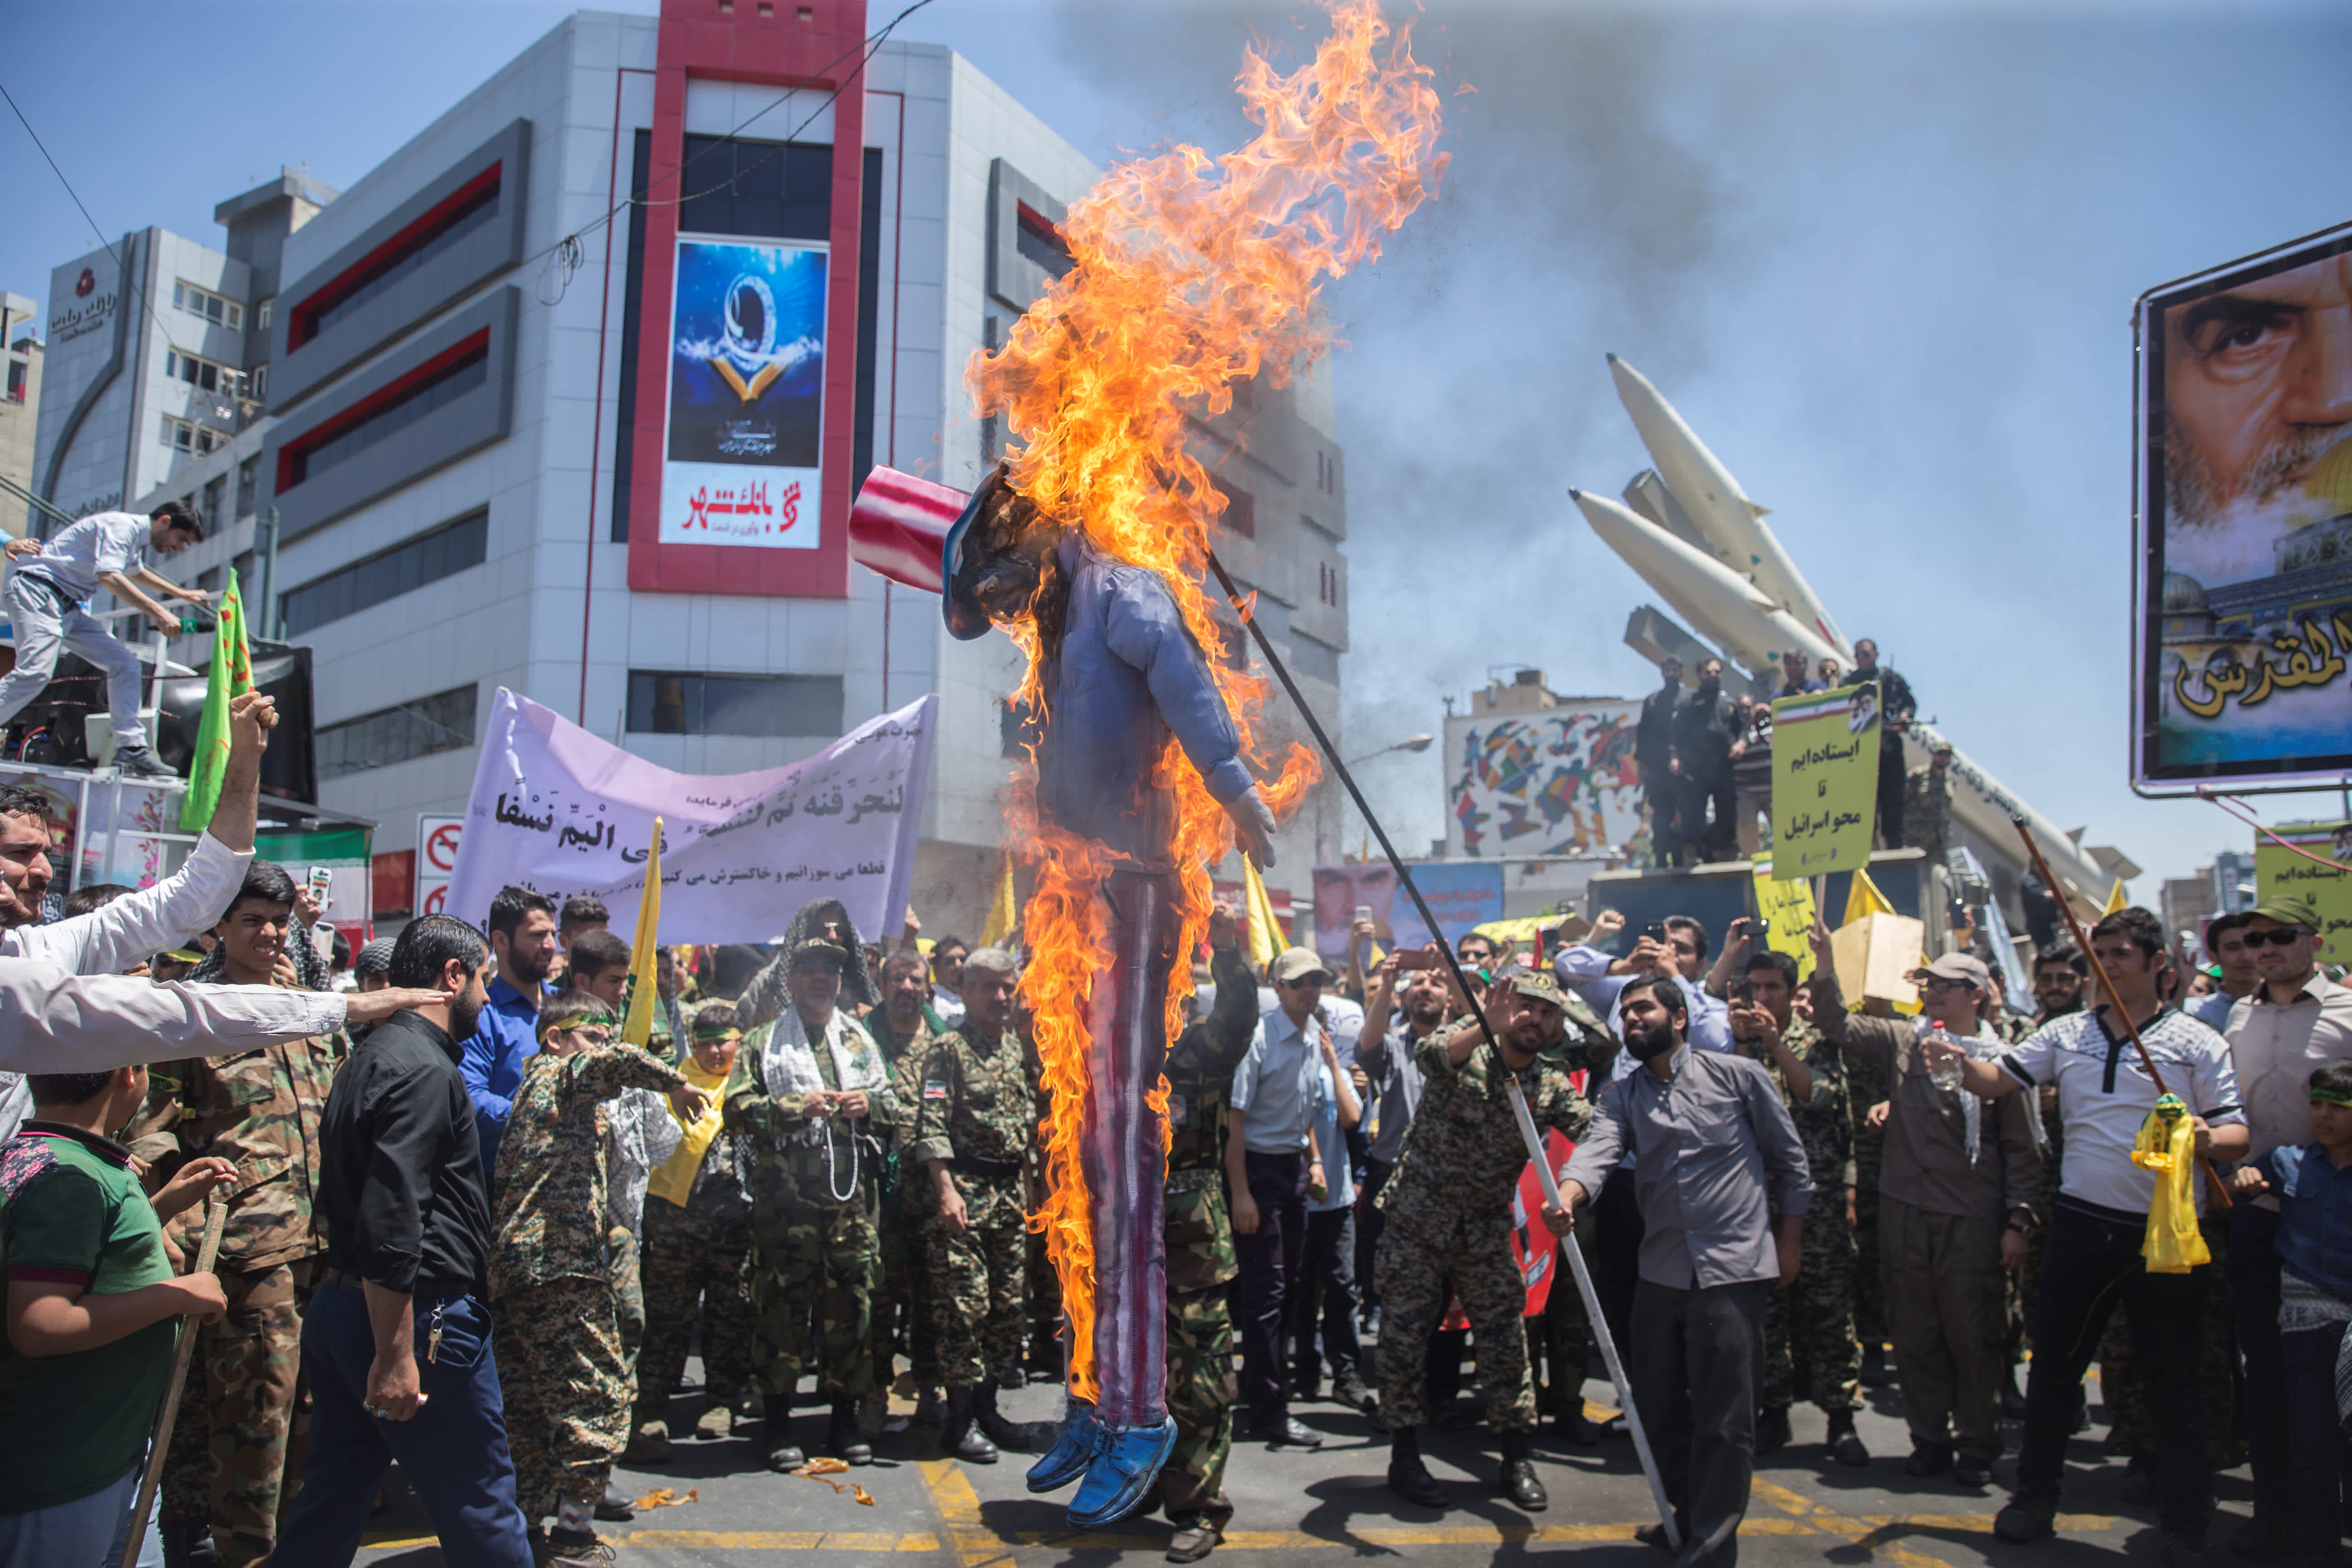 A scarecrow model is set on fire by Iranian demonstratorson during the annual pro-Palestinian rally marking Al-Quds Day in Tehran, Iran, June 23, 2017. NAZANIN TABATABAEE YAZDI/ TIMA VIA REUTERS